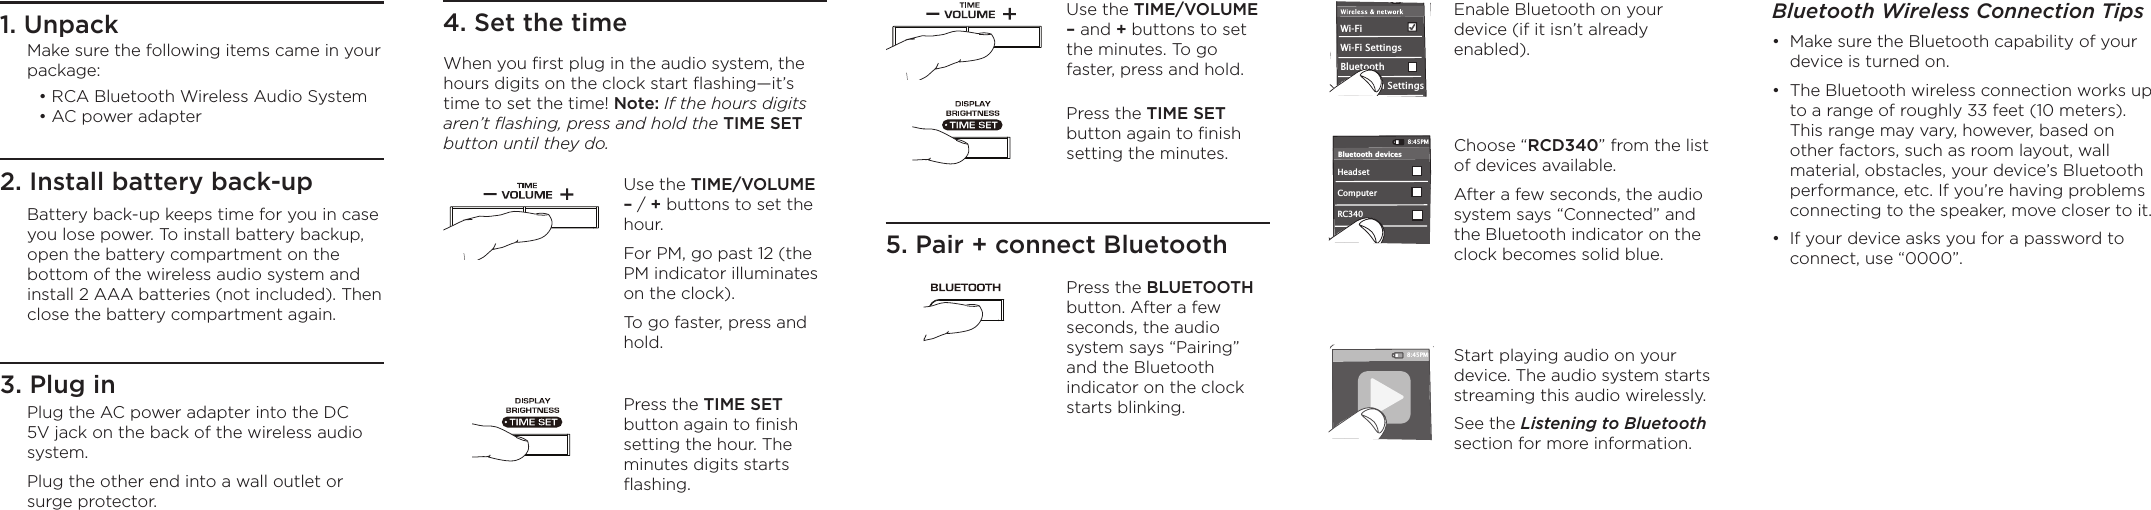 Enable Bluetooth on your device (if it isn’t already enabled).1. Unpack2. Install battery back-up4. Set the time5. Pair + connect BluetoothUse the TIME/VOLUME – and + buttons to set the minutes. To go faster, press and hold.Press the TIME SET button again to ﬁnish setting the minutes.3. Plug inWi-Fi BluetoothBluetooth SettingsVPN SettingsWi-Fi Settings8:45PMHeadset RC340Computer8:45PMBluetooth devices8:45PMBluetooth Wireless Connection Tips•  Make sure the Bluetooth capability of your device is turned on.•  The Bluetooth wireless connection works up to a range of roughly 33 feet (10 meters). This range may vary, however, based on other factors, such as room layout, wall material, obstacles, your device’s Bluetooth performance, etc. If you’re having problems connecting to the speaker, move closer to it. •  If your device asks you for a password to connect, use “0000”.When you ﬁrst plug in the audio system, the hours digits on the clock start ﬂashing—it’s time to set the time! Note: If the hours digits aren’t ﬂashing, press and hold the TIME SET button until they do.Use the TIME/VOLUME – / + buttons to set the hour. For PM, go past 12 (the PM indicator illuminates on the clock). To go faster, press and hold.Press the BLUETOOTH button. After a few seconds, the audio system says “Pairing” and the Bluetooth indicator on the clock starts blinking.  Choose “RCD340” from the list of devices available.After a few seconds, the audio system says “Connected” and the Bluetooth indicator on the clock becomes solid blue.Make sure the following items came in your package:• RCA Bluetooth Wireless Audio System • AC power adapterBattery back-up keeps time for you in case you lose power. To install battery backup, open the battery compartment on the bottom of the wireless audio system and install 2 AAA batteries (not included). Then close the battery compartment again.Plug the AC power adapter into the DC 5V jack on the back of the wireless audio system. Plug the other end into a wall outlet or surge protector.Press the TIME SET button again to ﬁnish setting the hour. The minutes digits starts ﬂashing.Start playing audio on your device. The audio system starts streaming this audio wirelessly.See the Listening to Bluetooth section for more information.